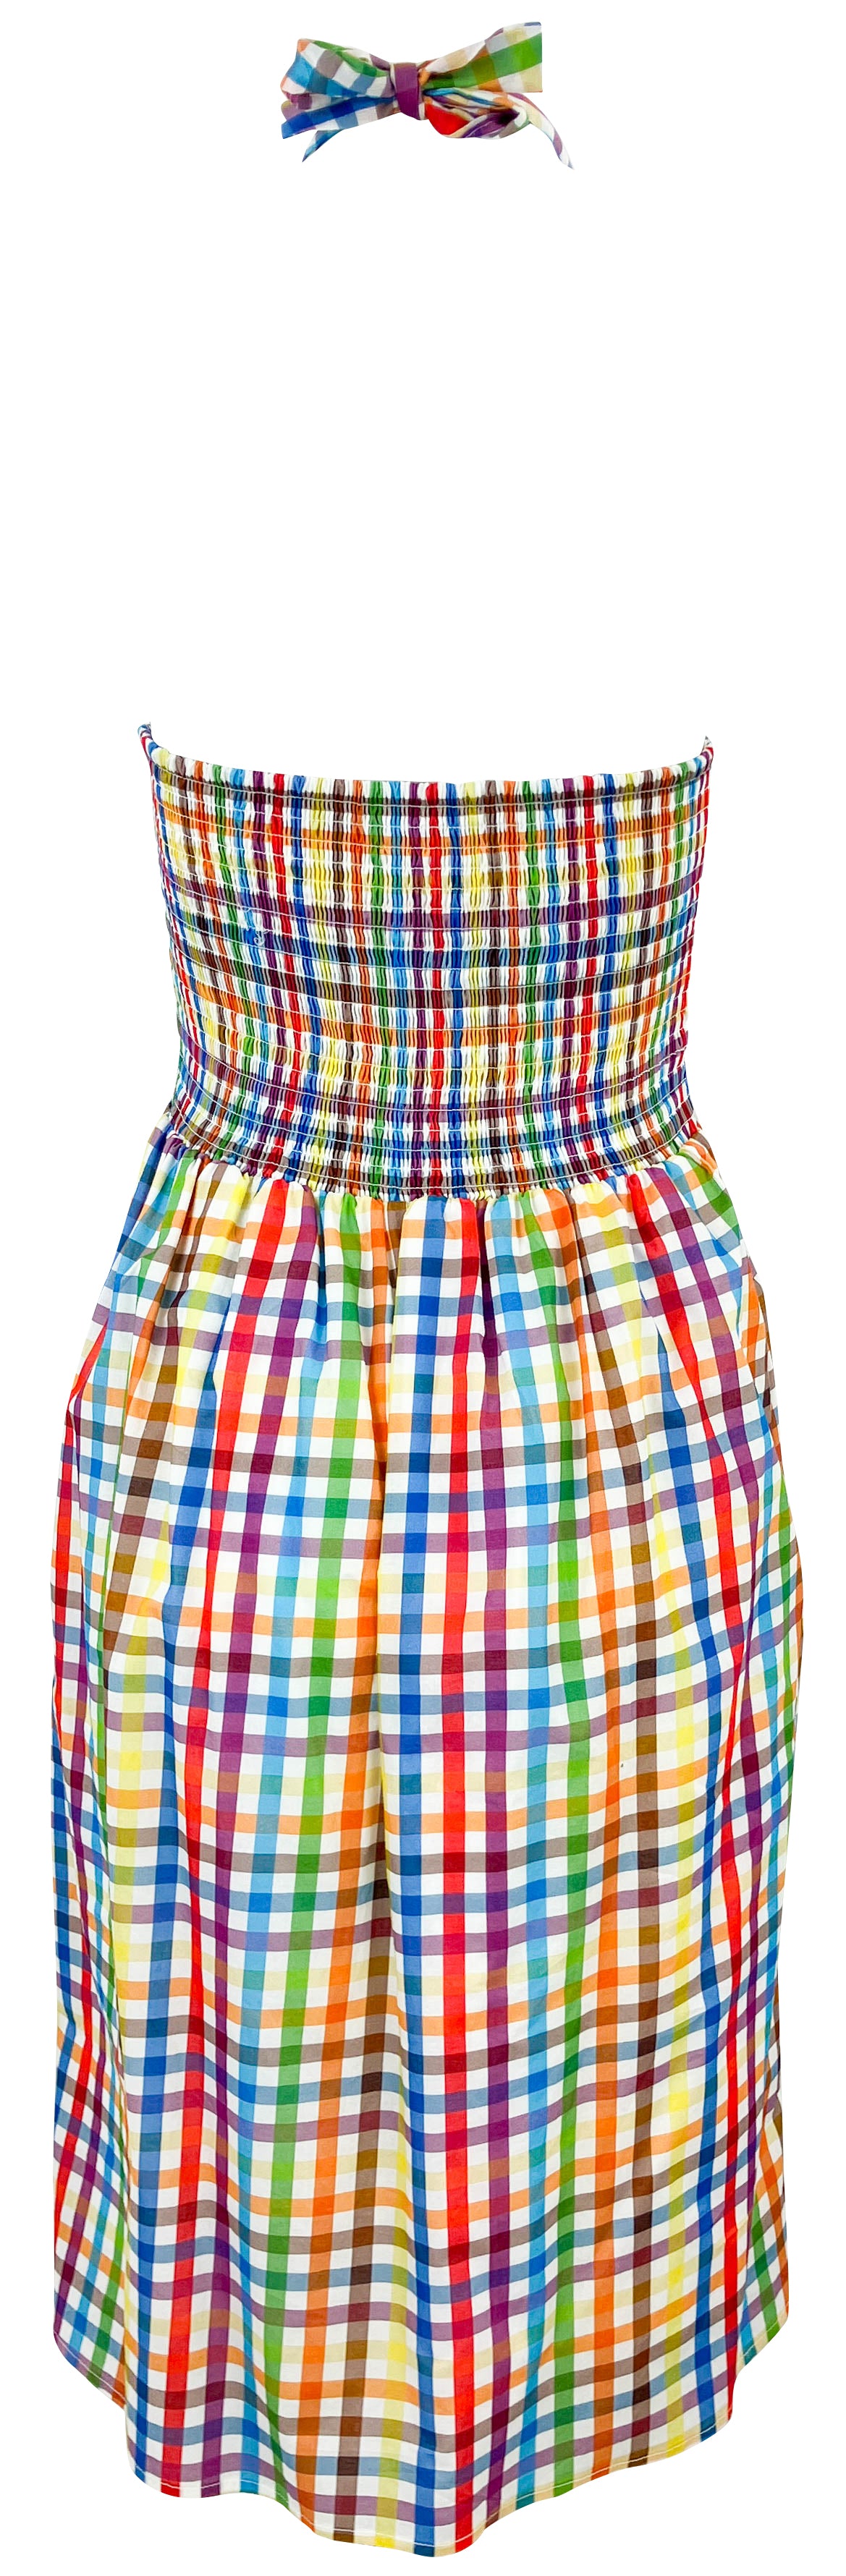 LaRoque Courtland Crossover Dress in Rainbow Check - Discounts on LaRoque at UAL